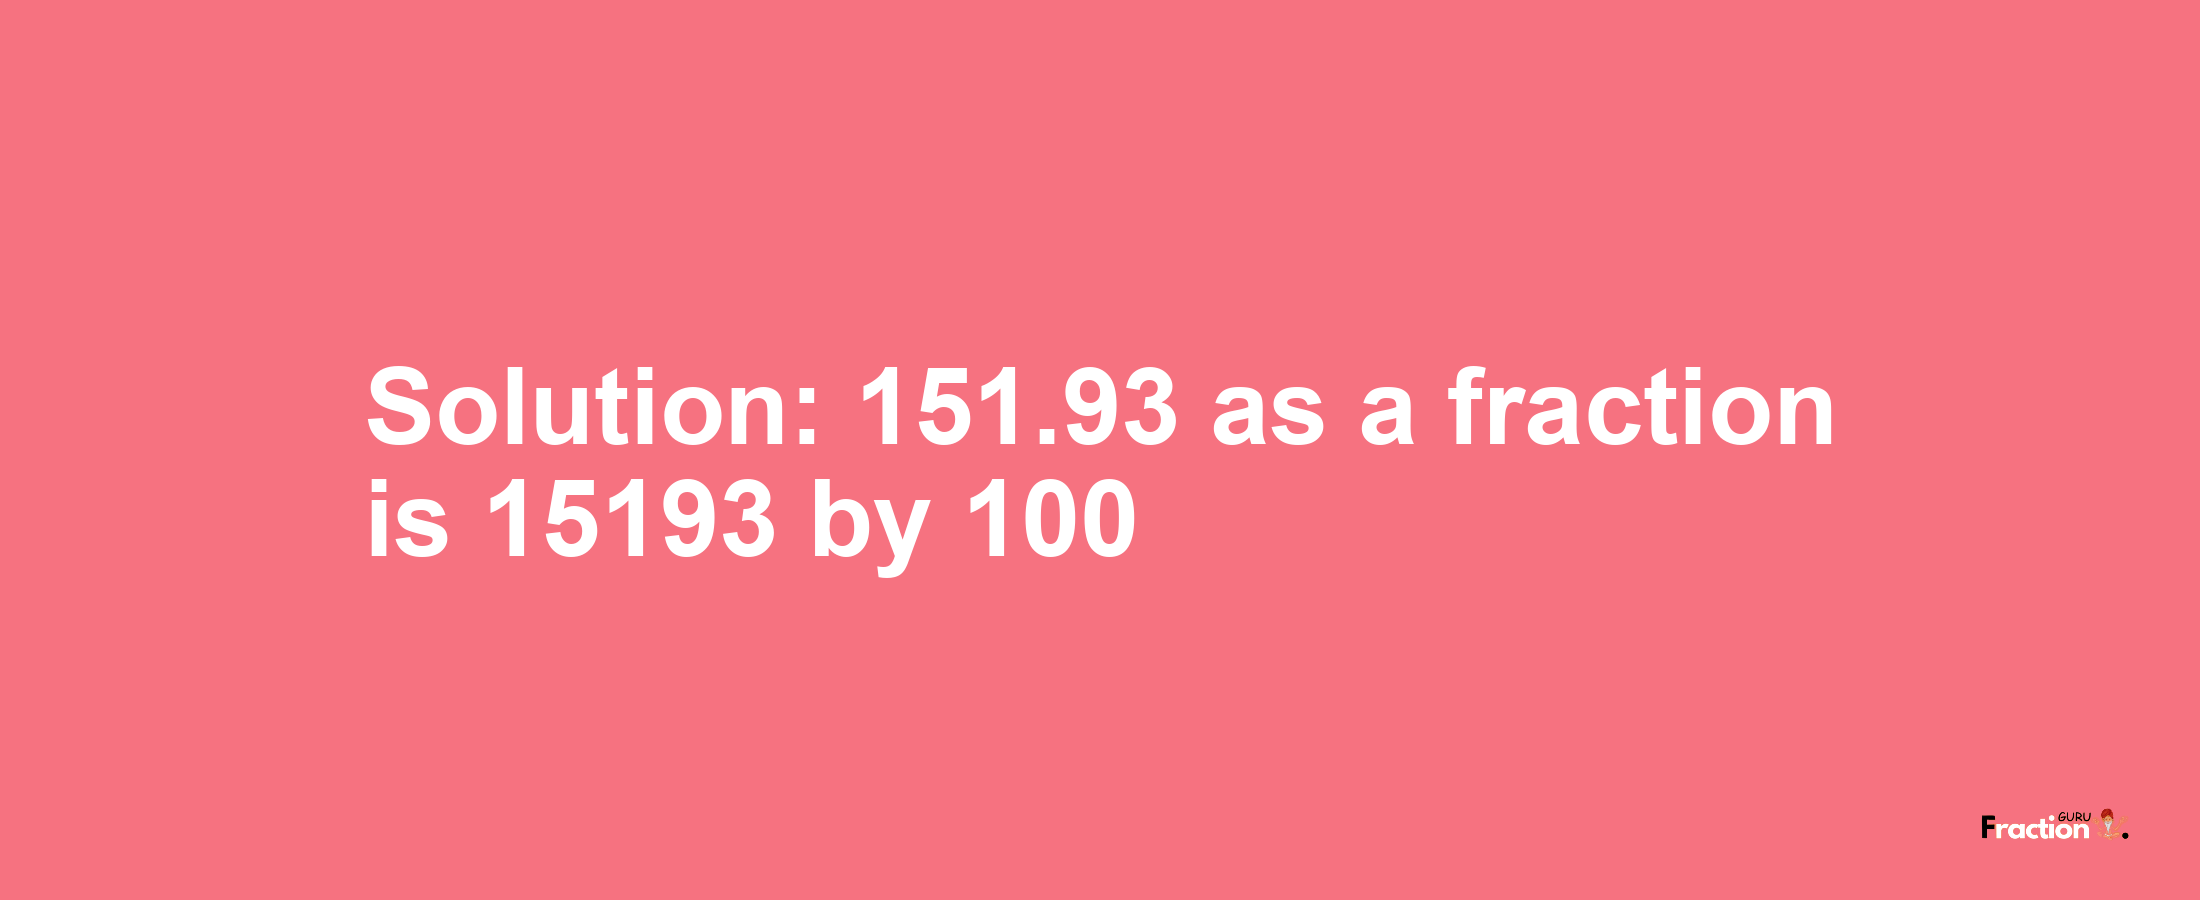 Solution:151.93 as a fraction is 15193/100